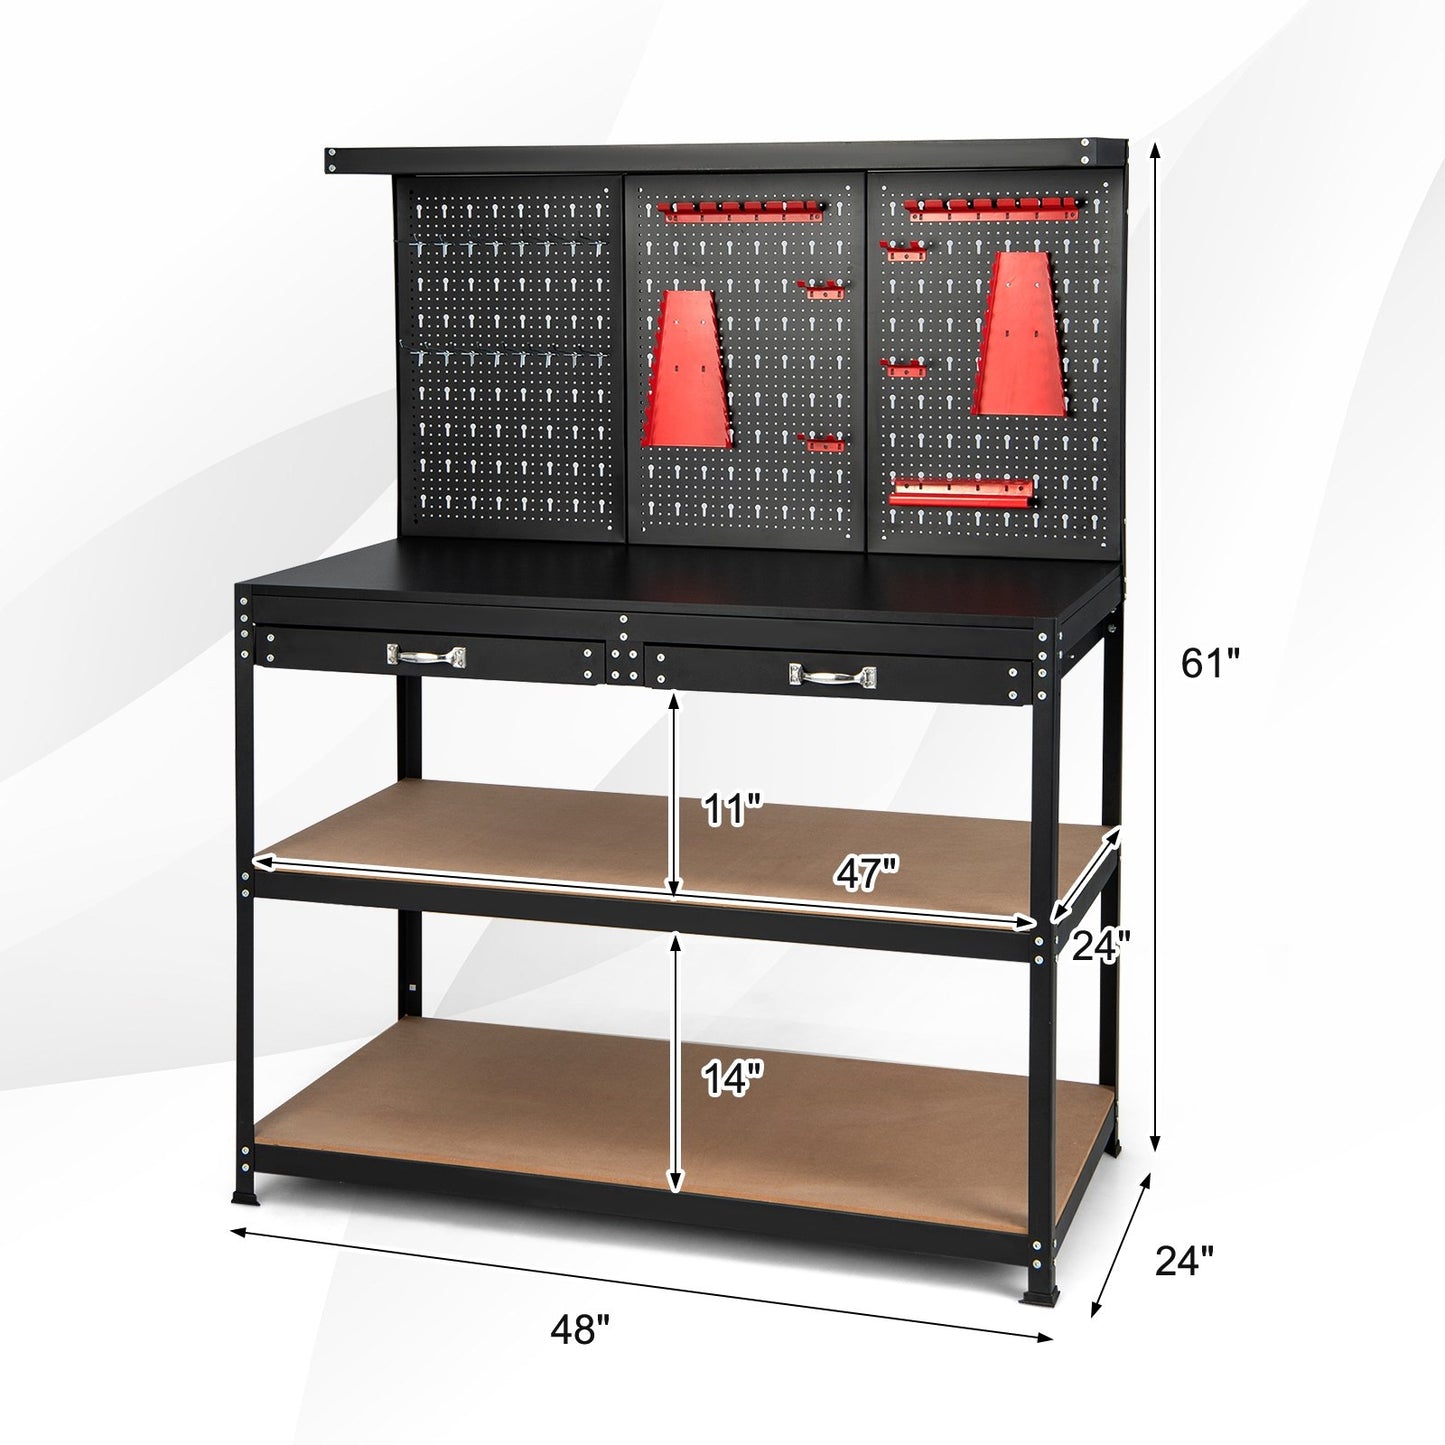 48 Inch Workbench with Pegboard and Drawers, Black